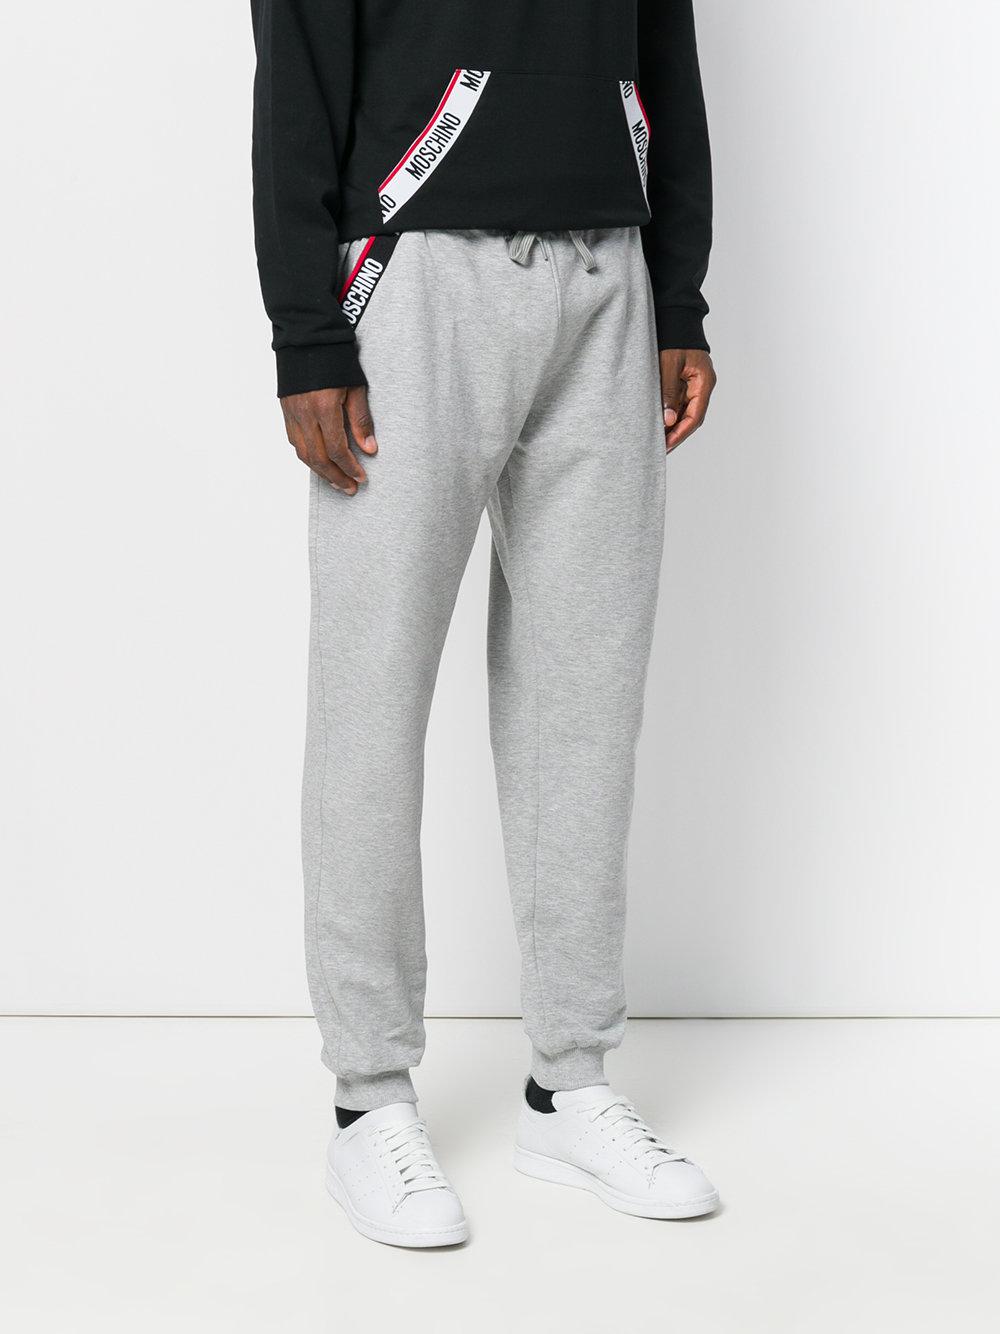 Moschino Cotton Logo Tracksuit Bottoms in Grey (Grey) for Men - Lyst